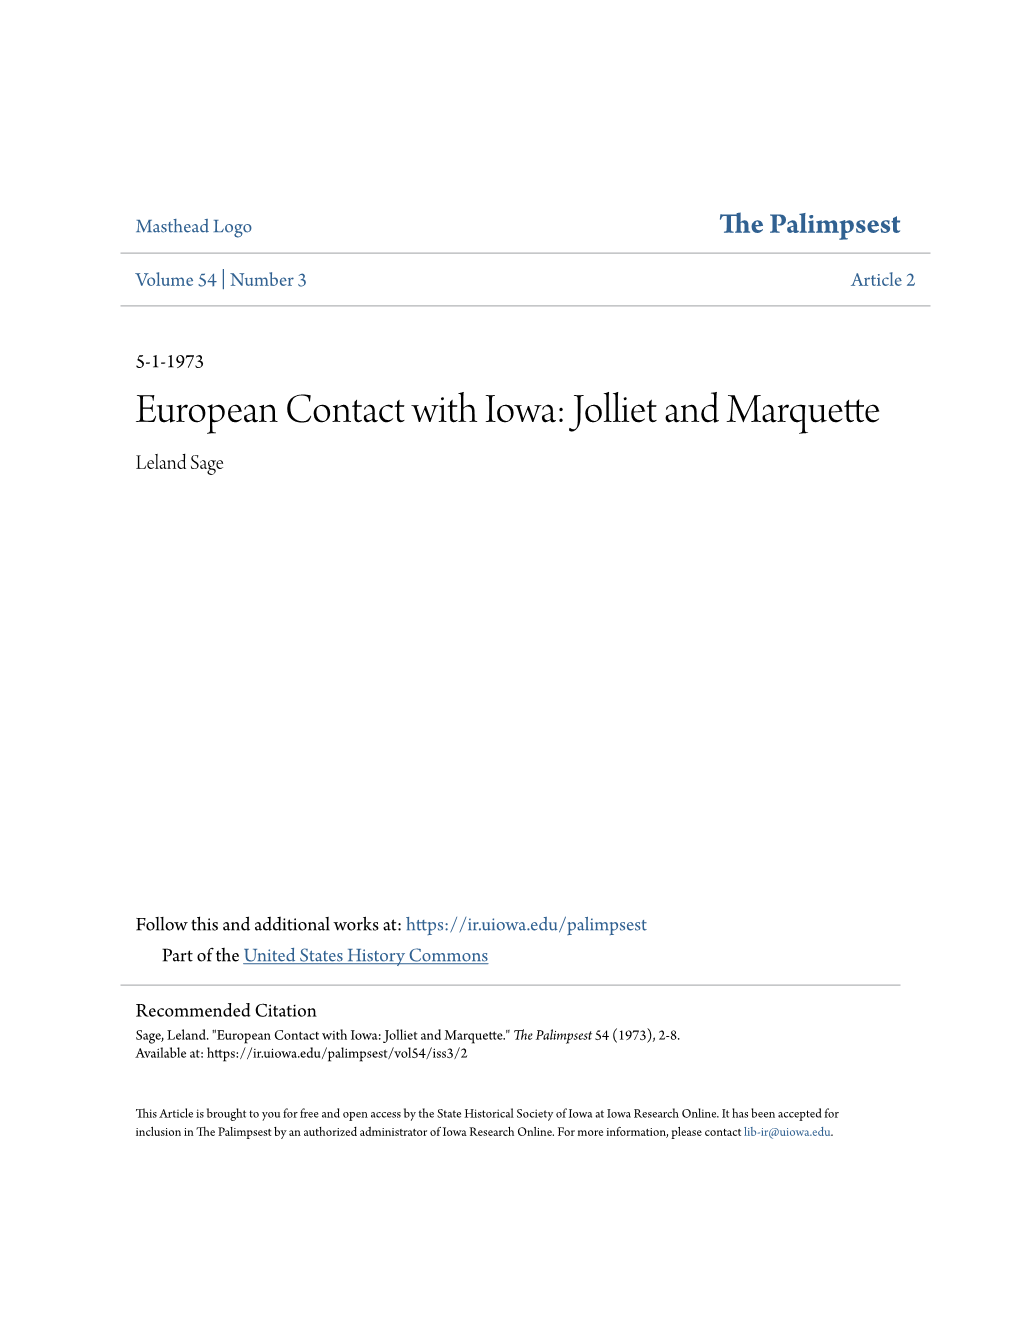 European Contact with Iowa: Jolliet and Marquette Leland Sage